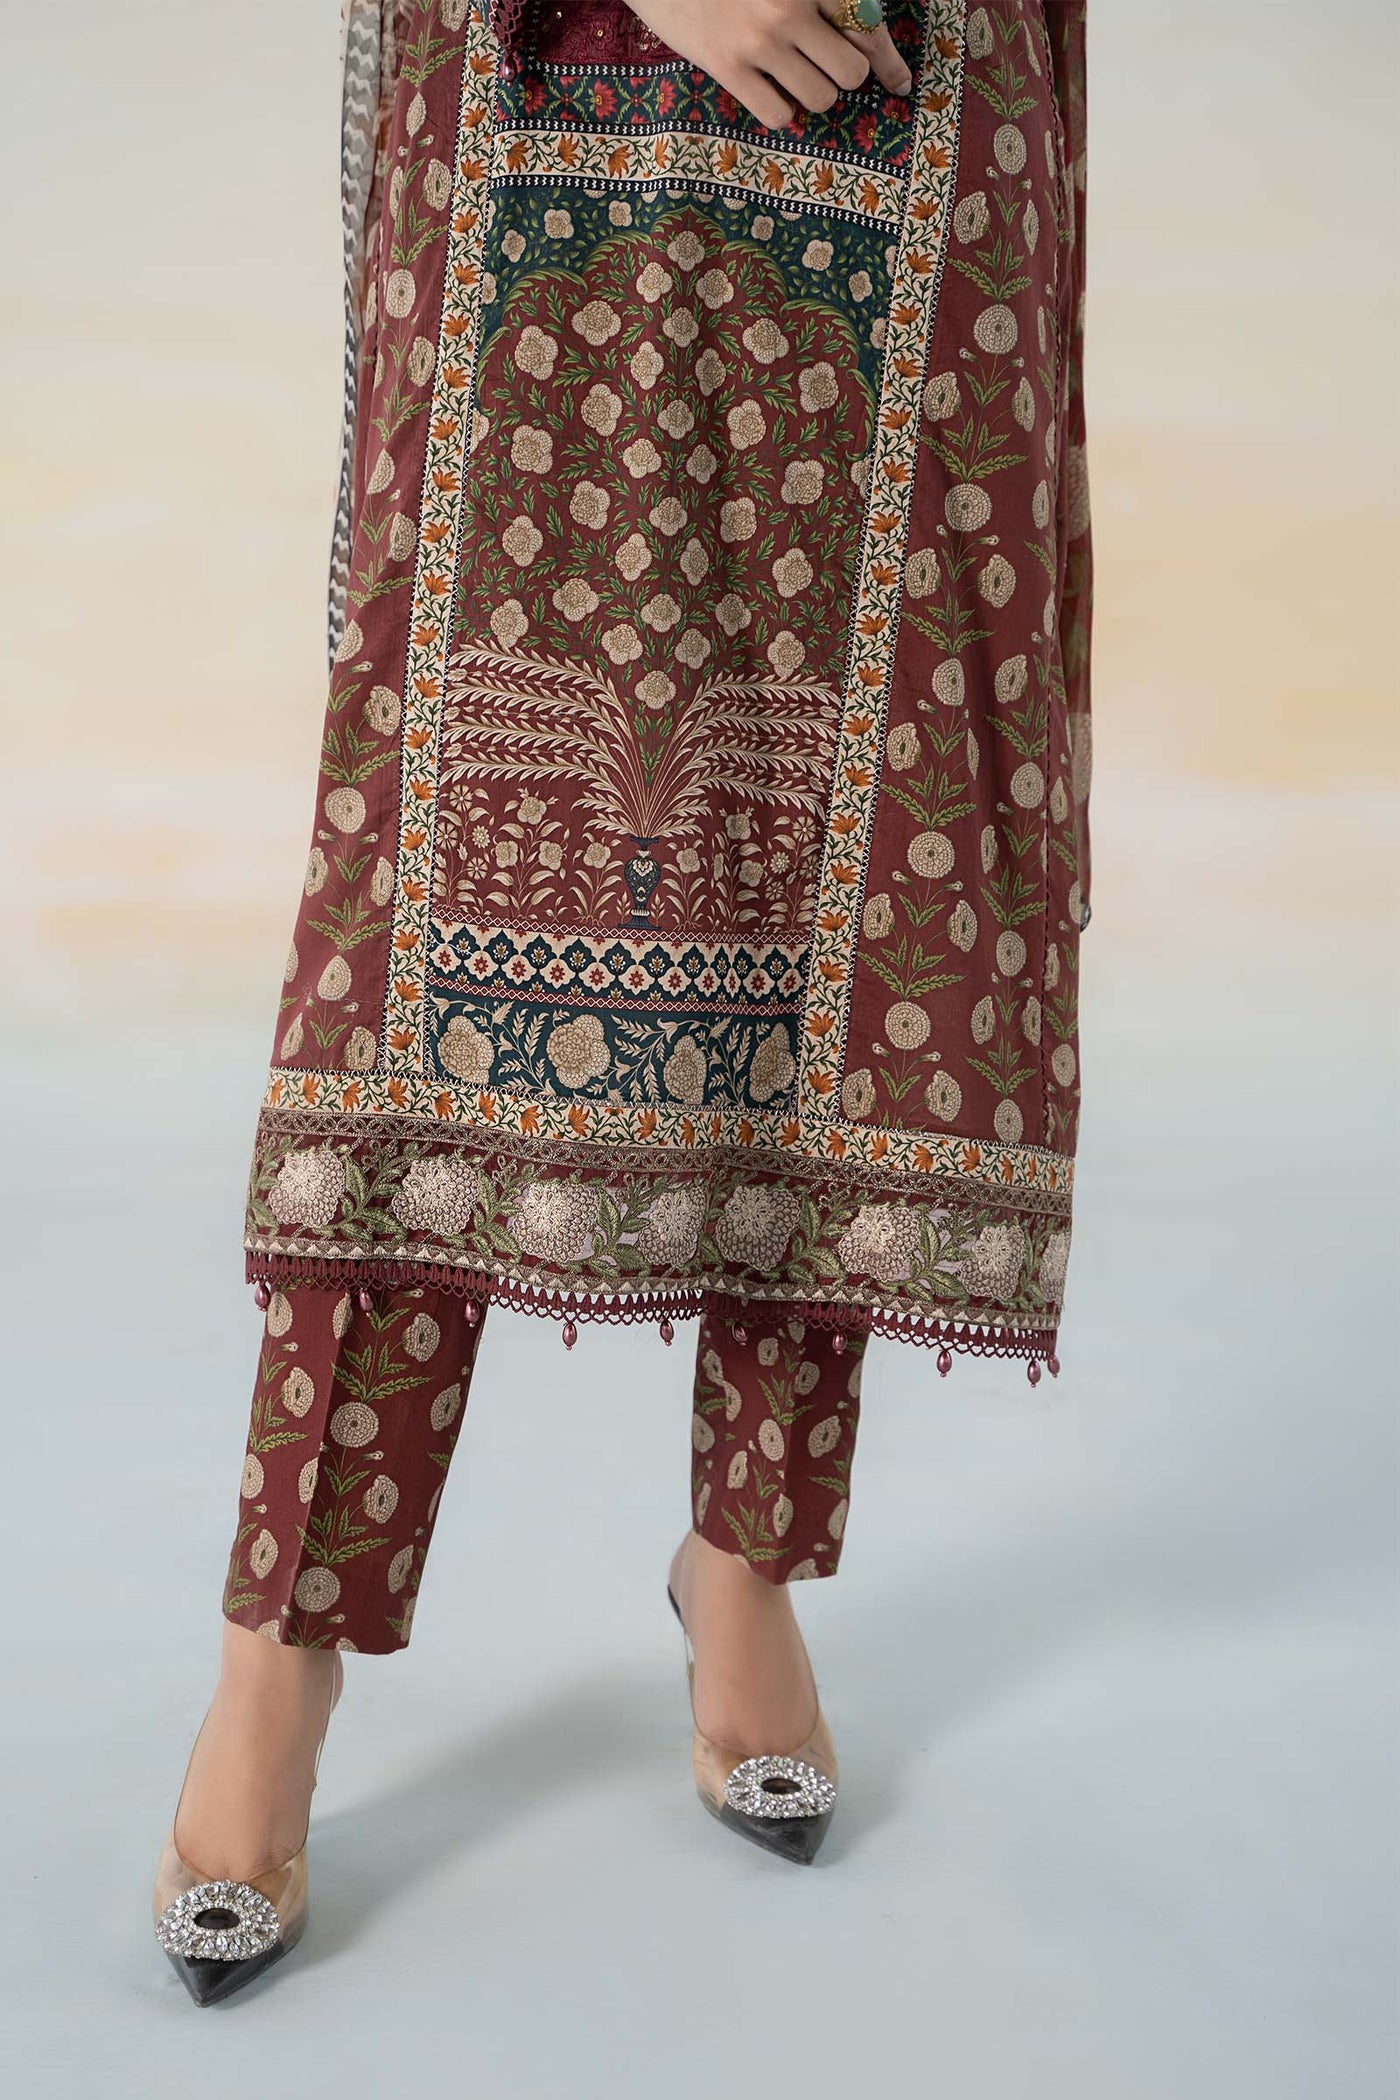 3 PIECE PRINTED LAWN SUIT | MPS-2114-B